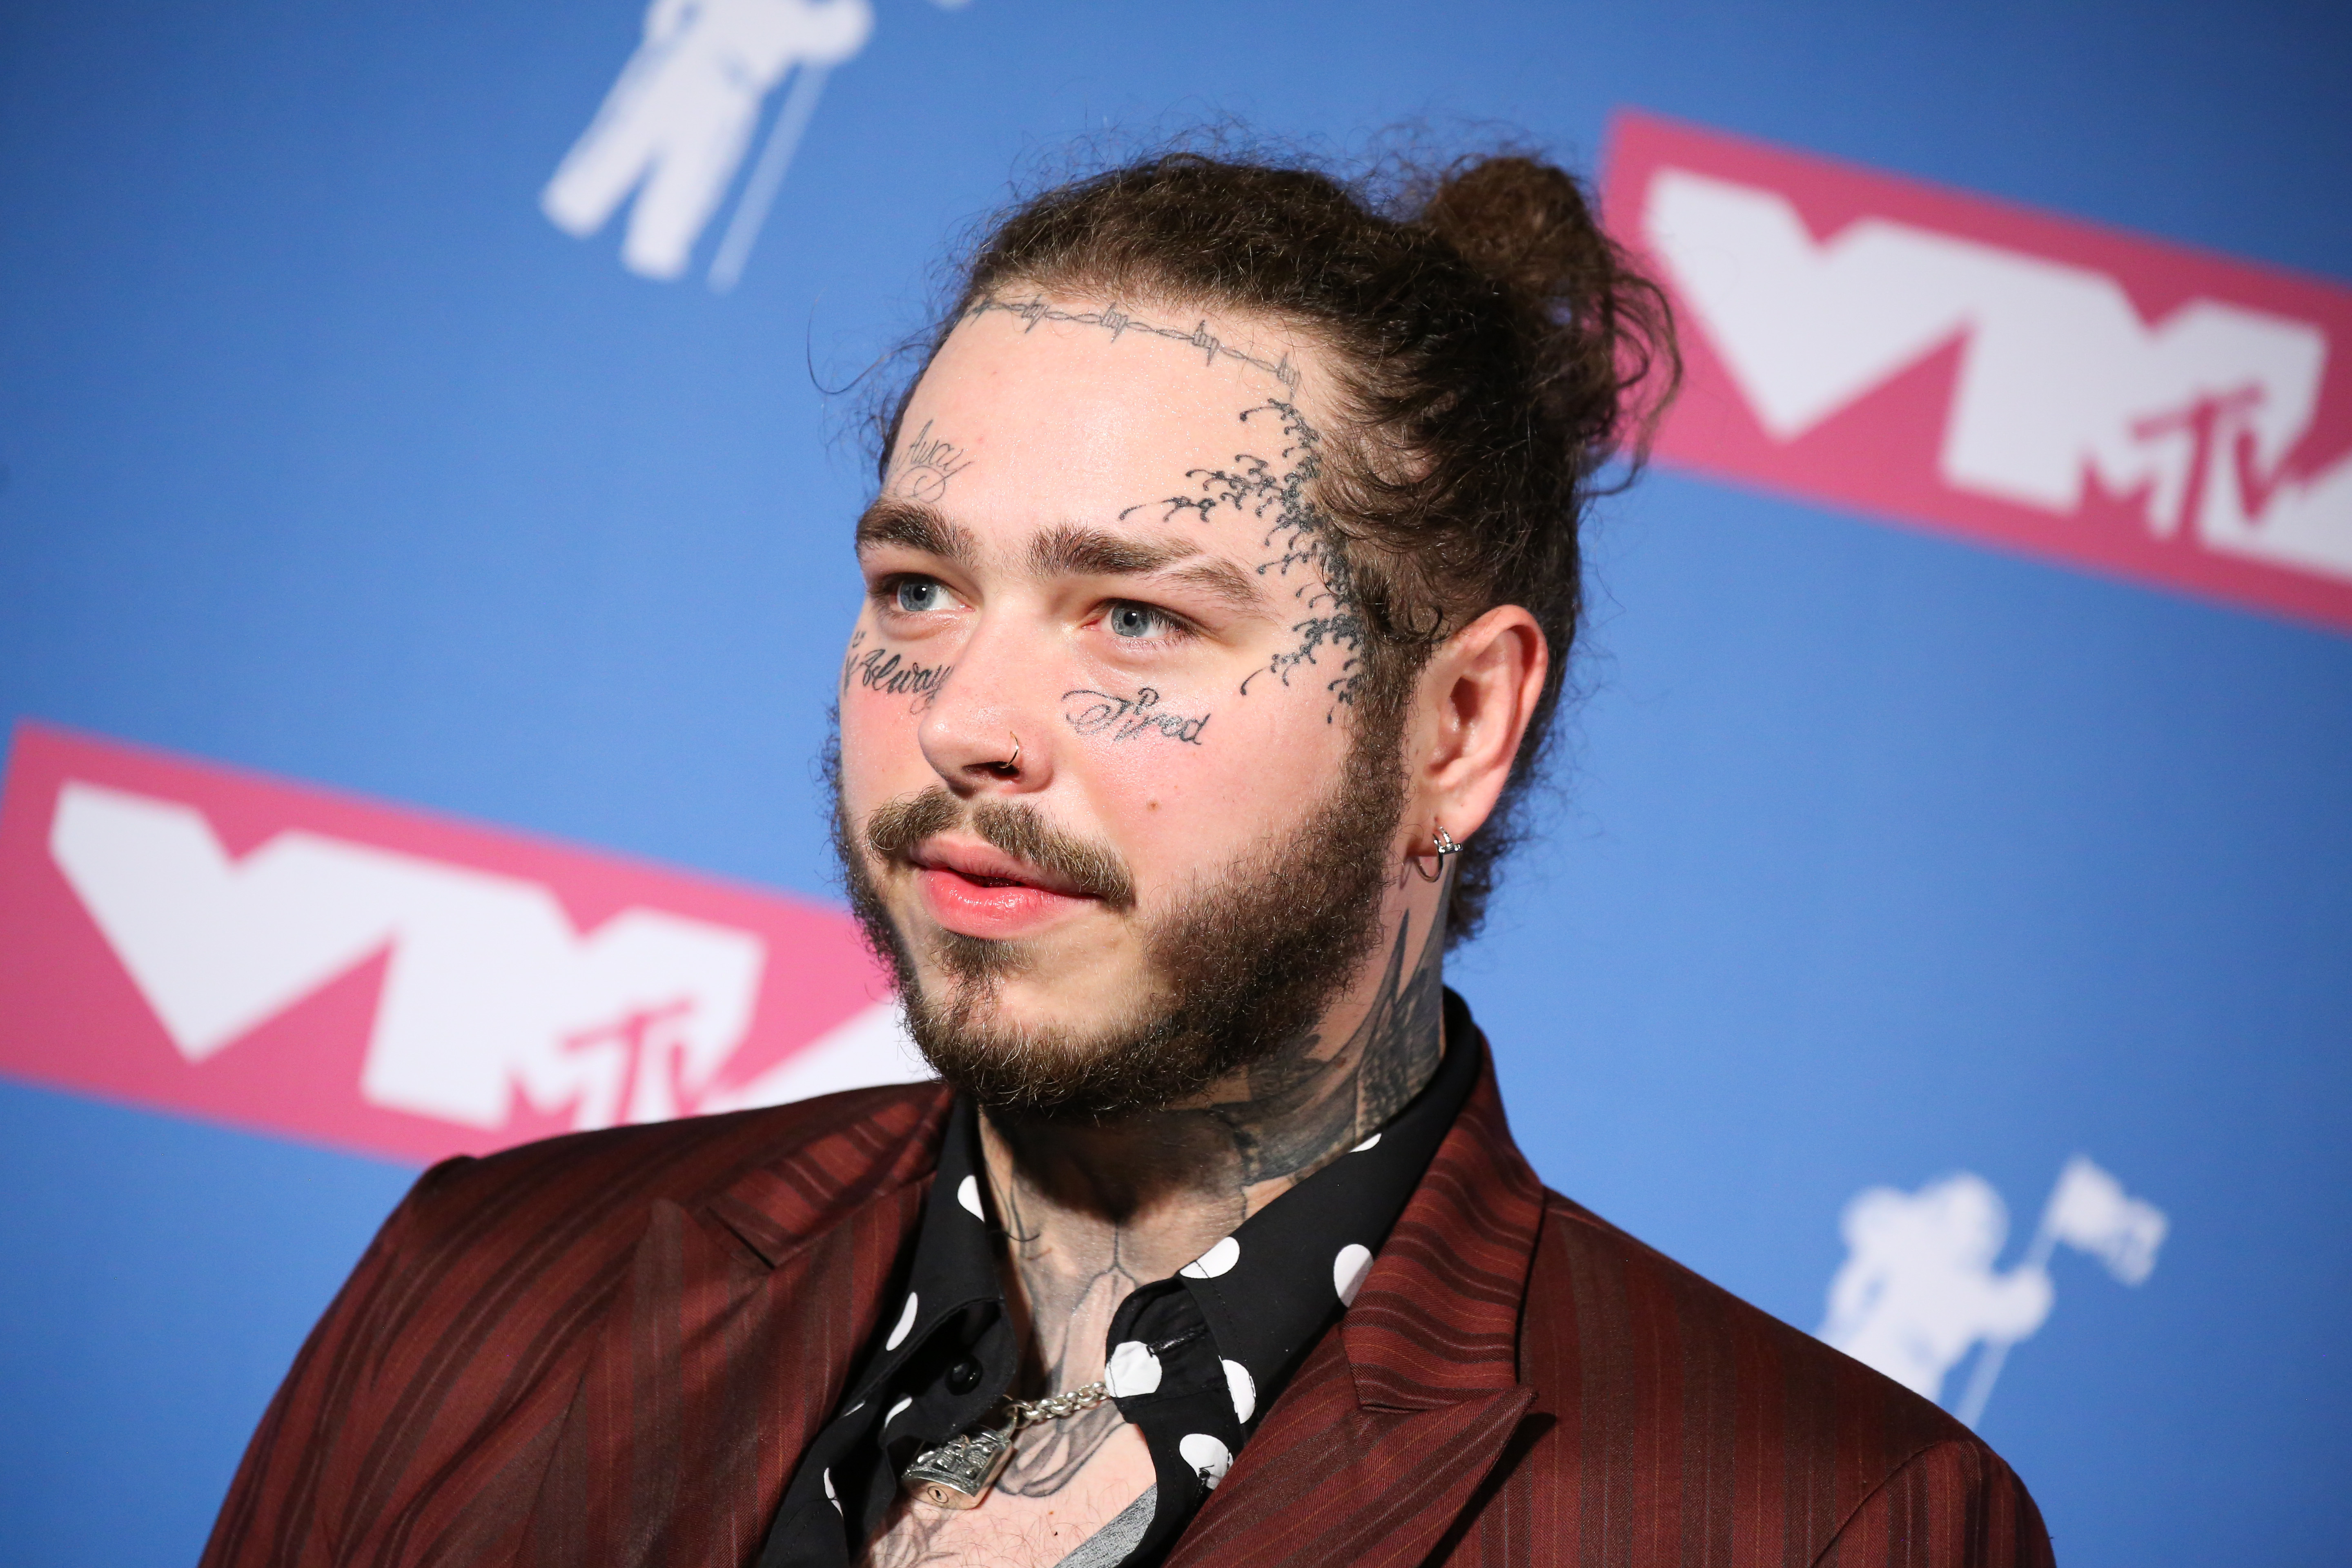 Celebrities who have face tattoos